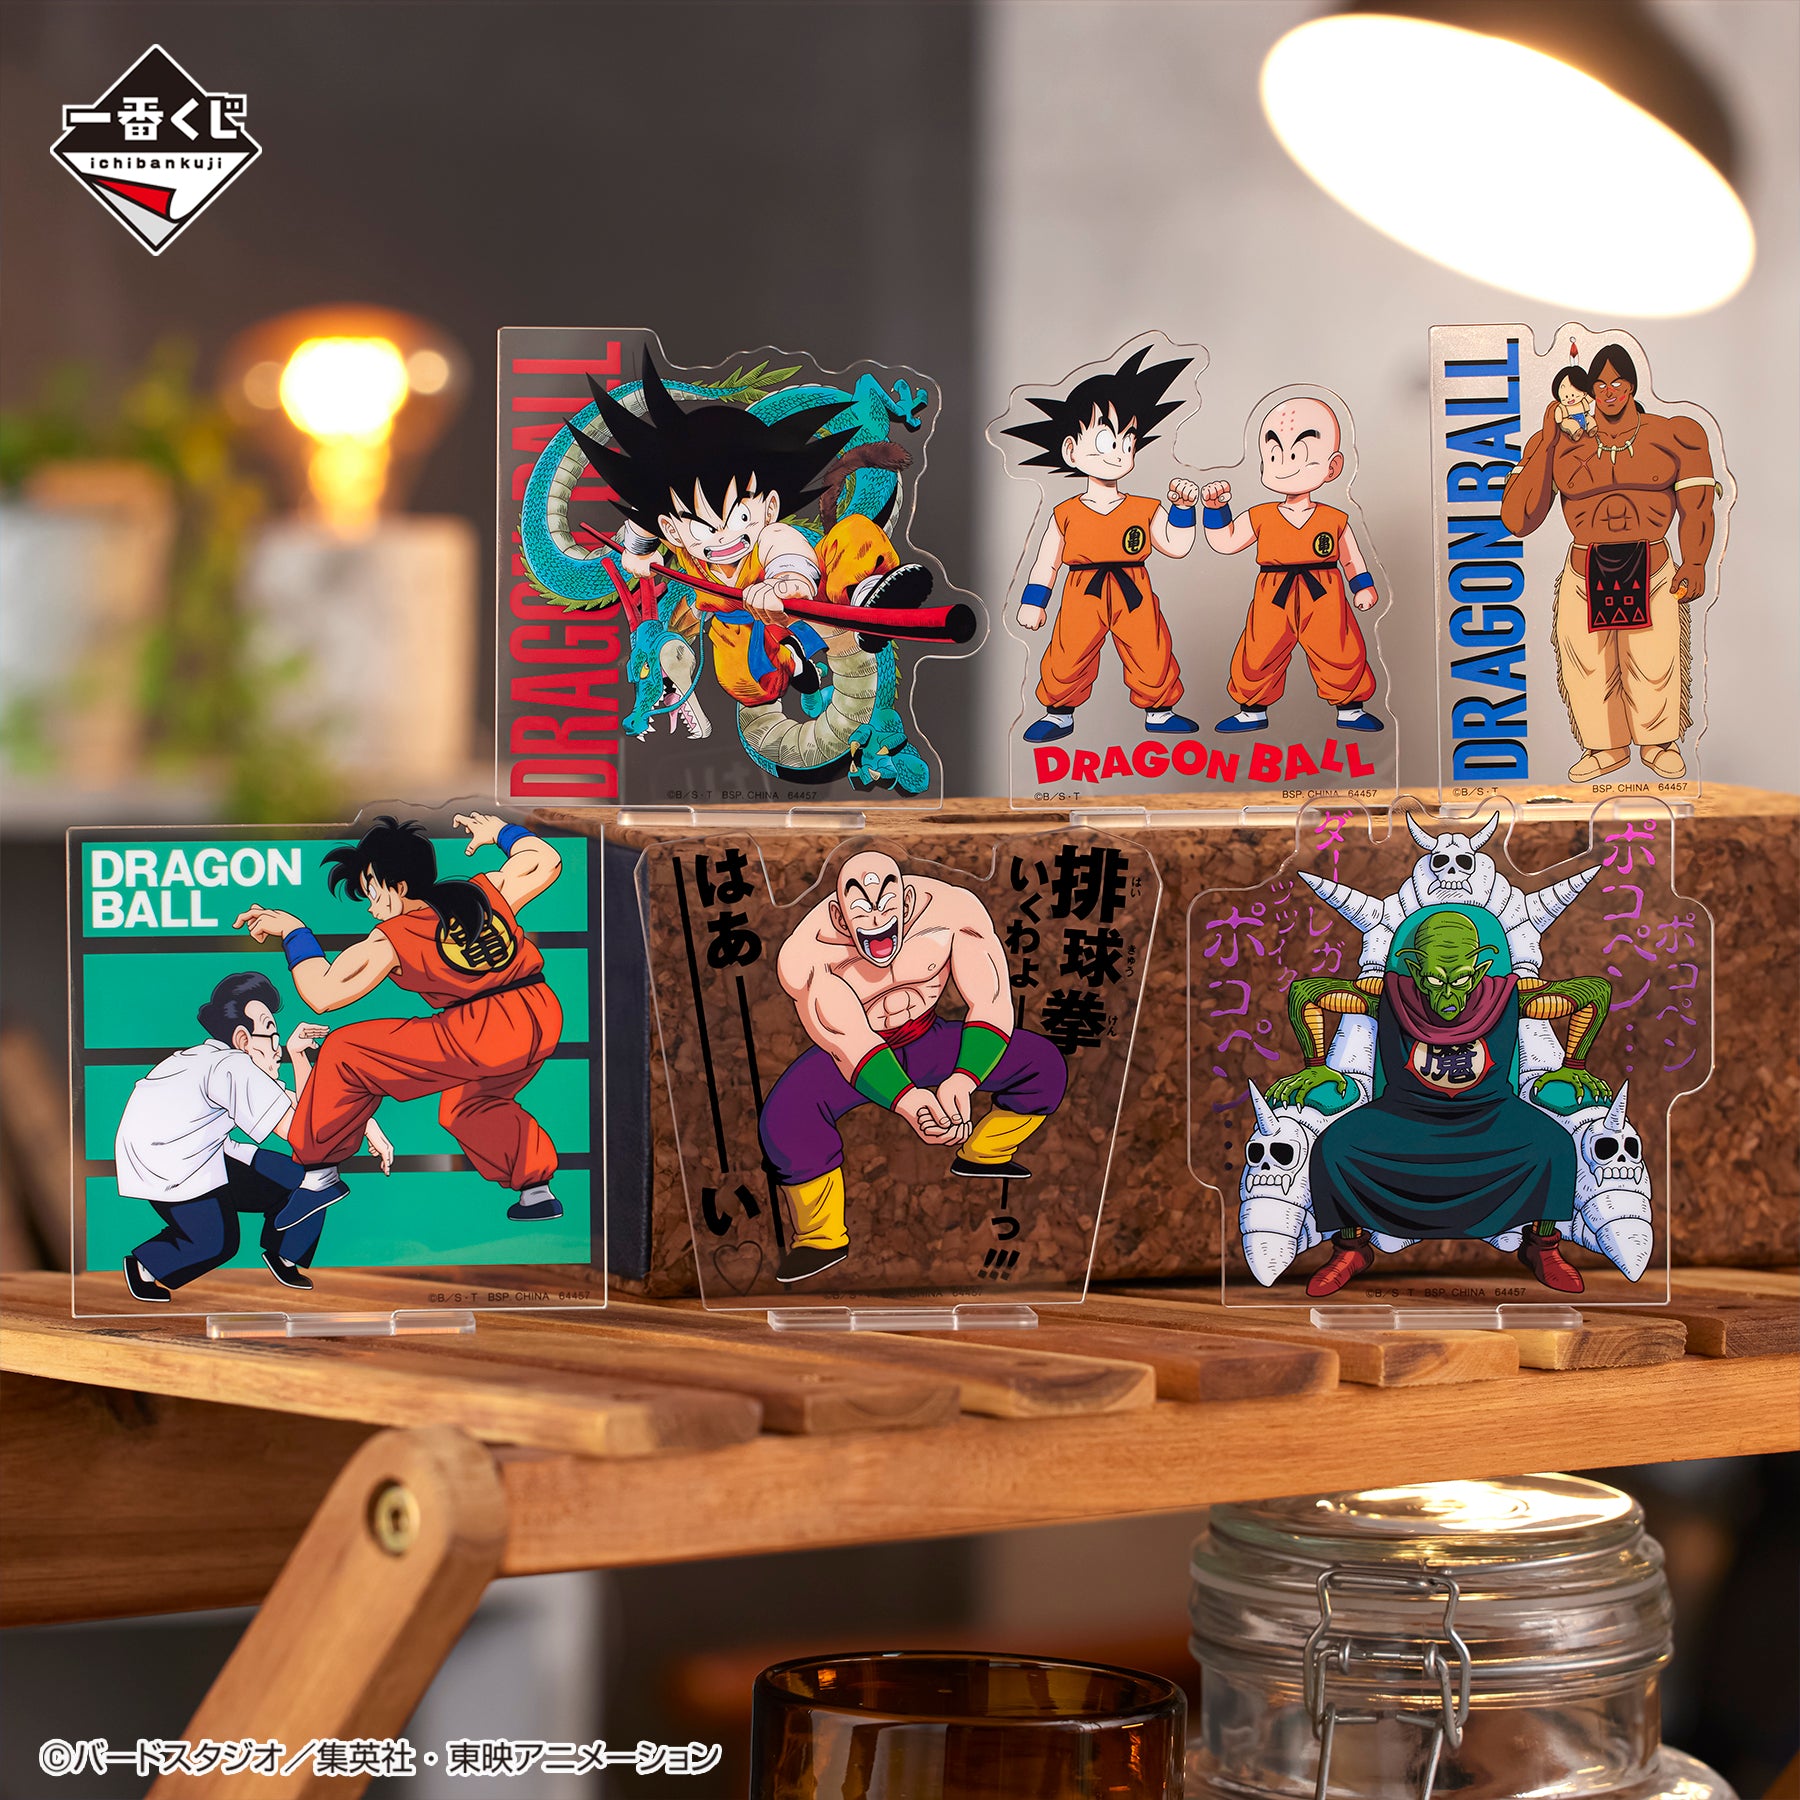 DRAGON BALL ICHIBAN KUJI - Dragon Ball EX Temple Above the Clouds - F PRIZE - Dragon Stand Collection complete set 6 Pcs